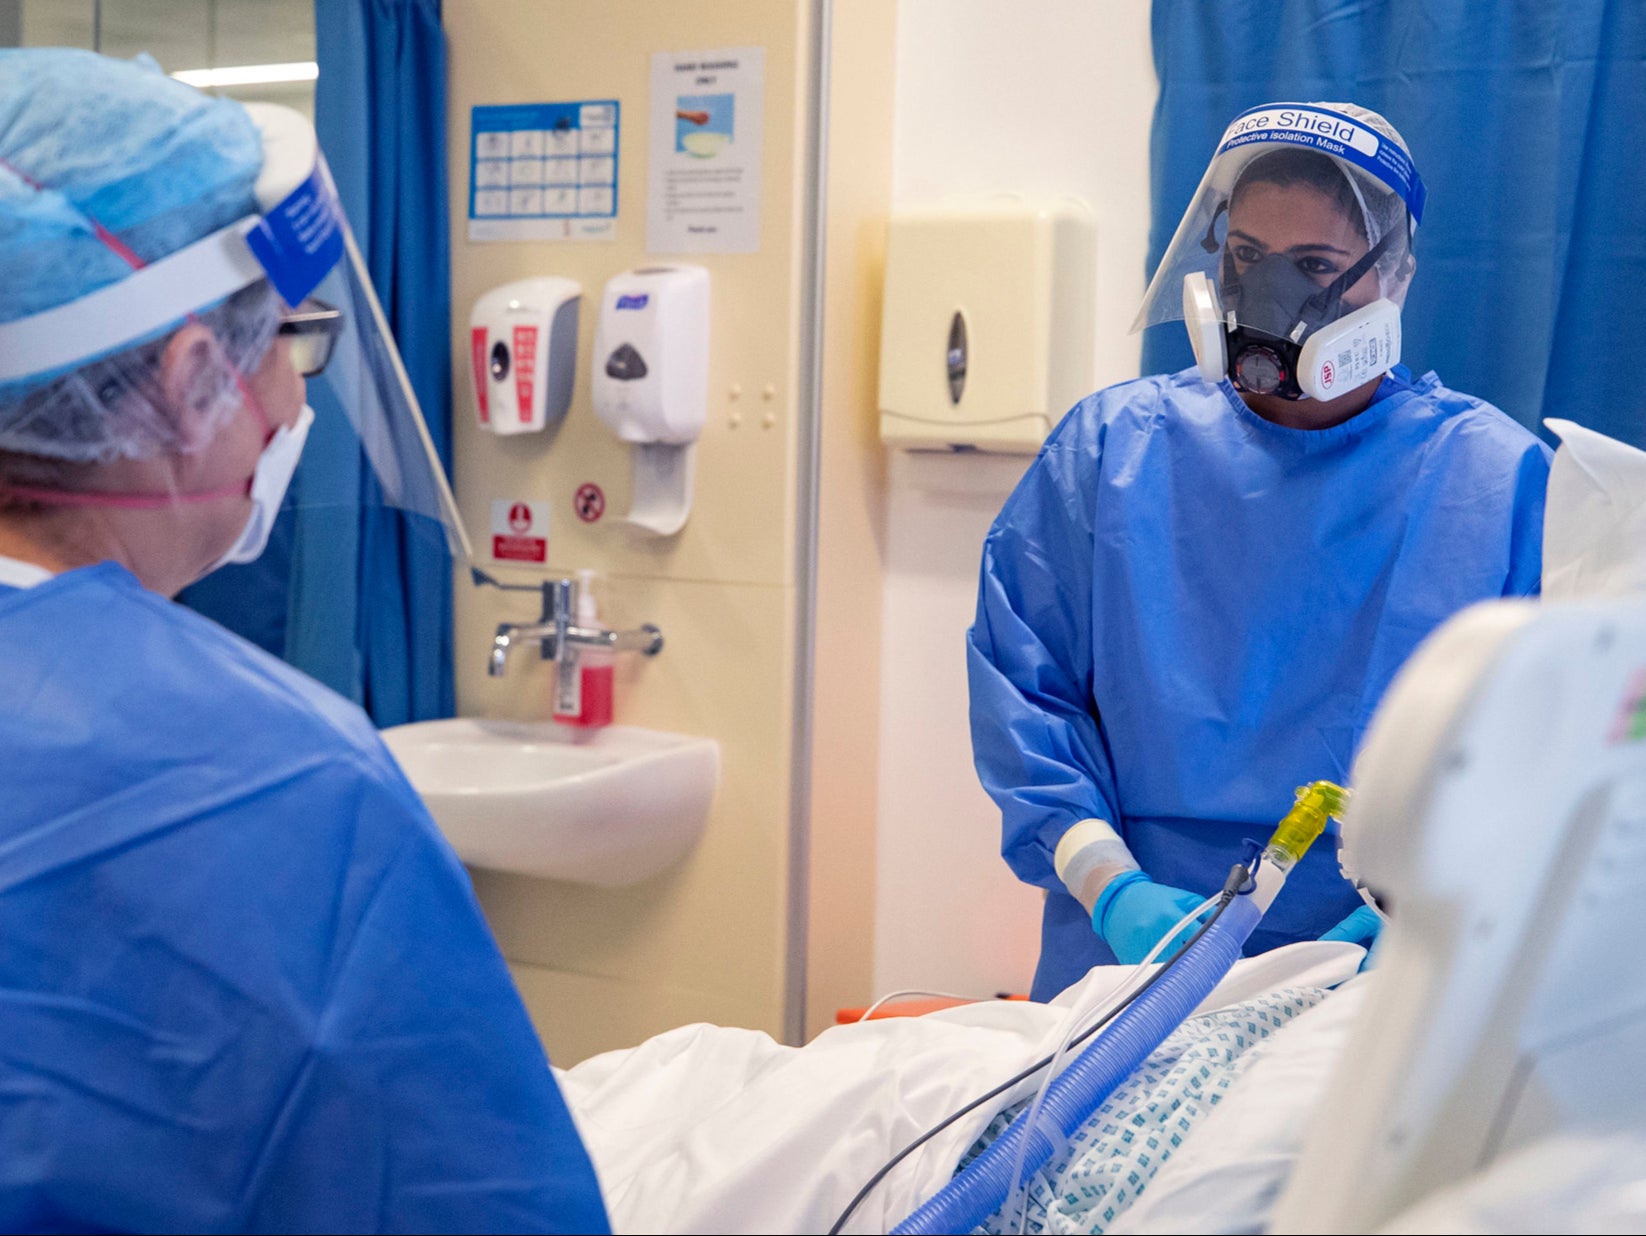 Health workers wearing full personal protective equipment tend to a patient on the intensive care unit at Whiston Hospital in Merseyside.